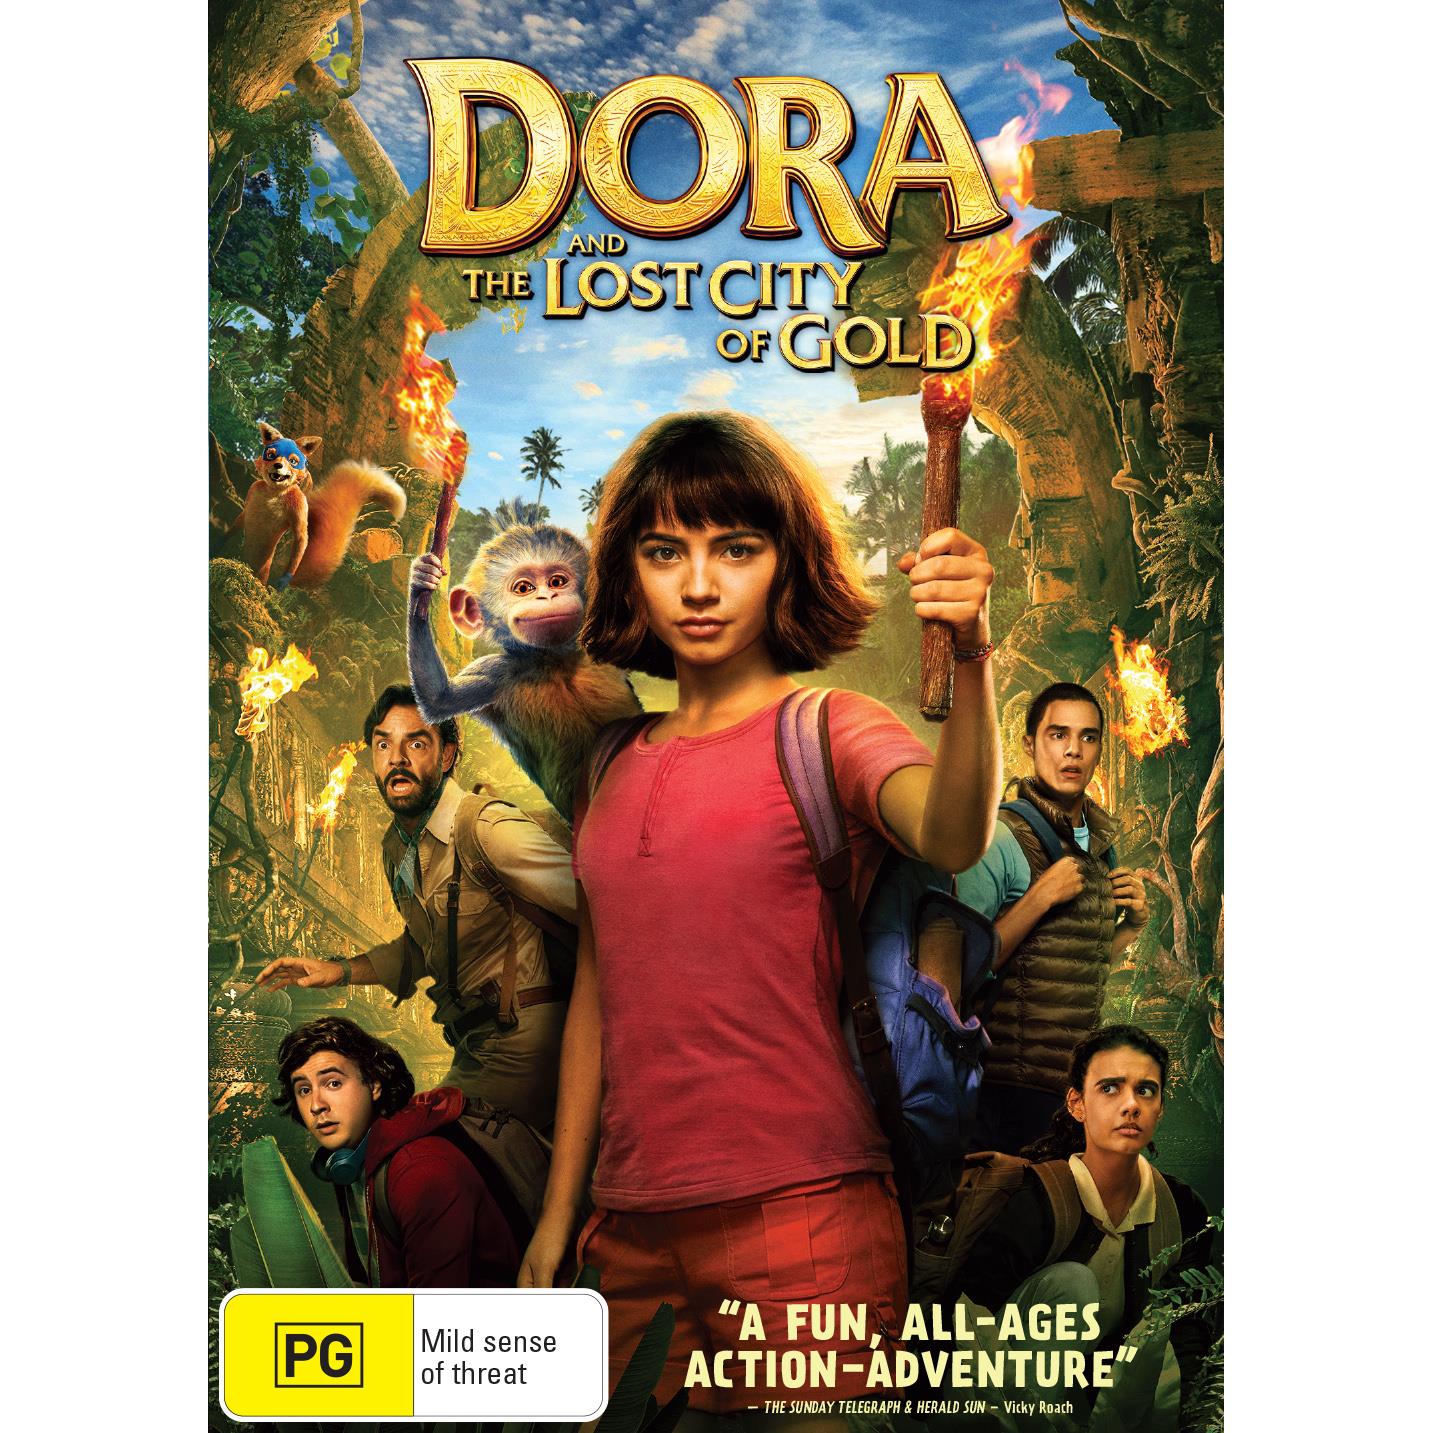 Dora and the Lost City of Gold Film Poster – My Hot Posters